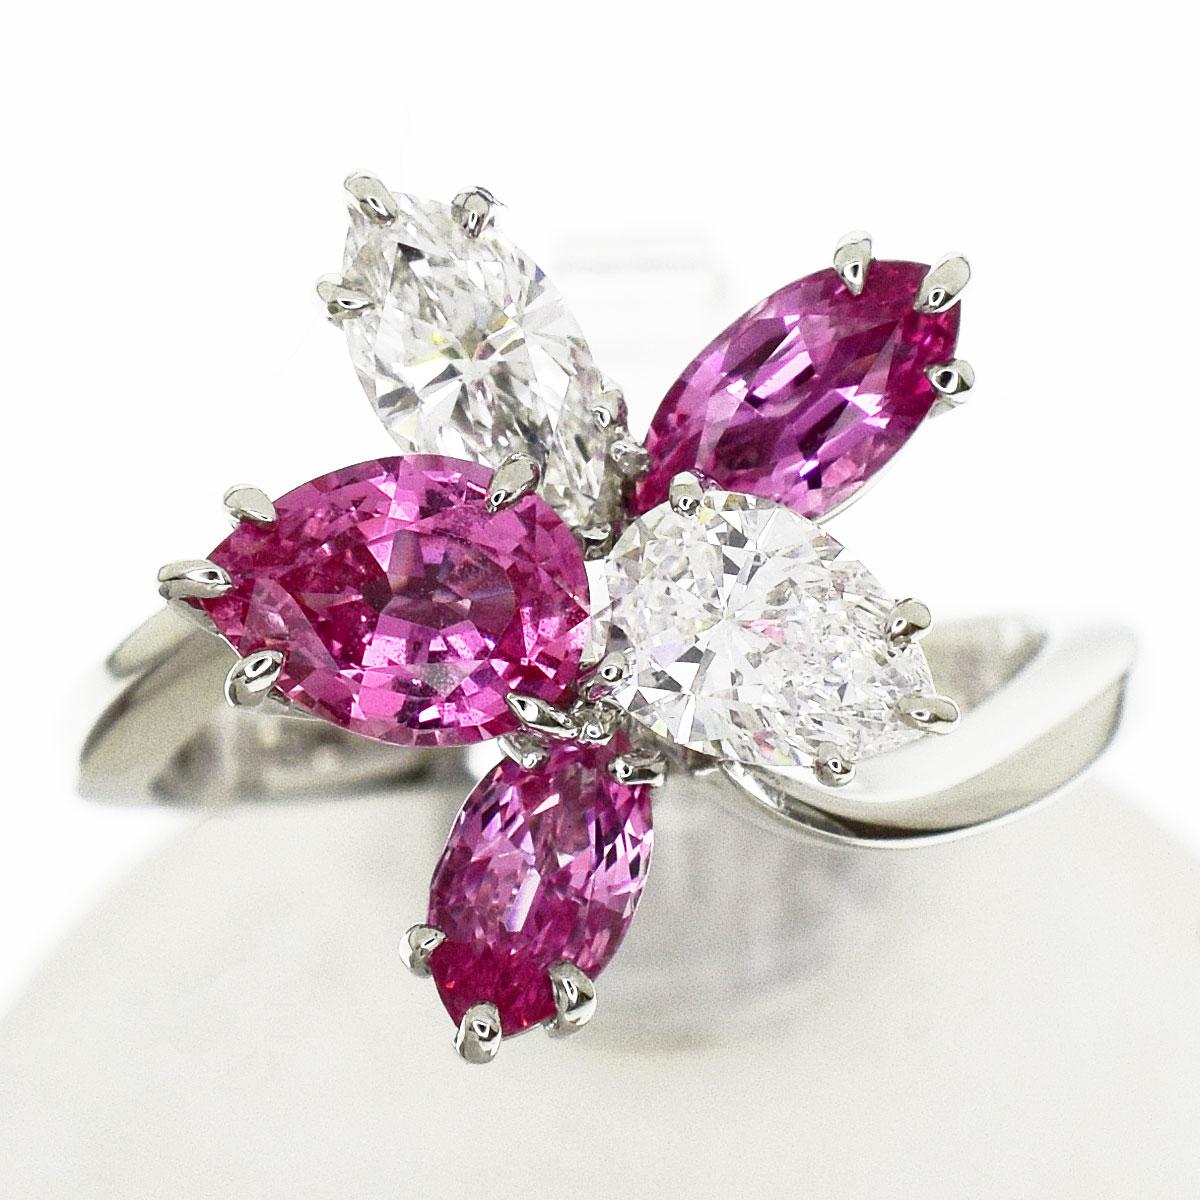 Brand:HARRY WINSTON
Name:Cluster by Harry Winston, Pink Sapphire and Diamond Ring
Retail Price: 1,890,000YEN(JPY)(included tax)
Material:2P diamonds (D0.39ct/0.49ct), 3P pink sapphire (S2.00cts), PT950 platinum
Weight:6.1g（Approx)
Ring size:British